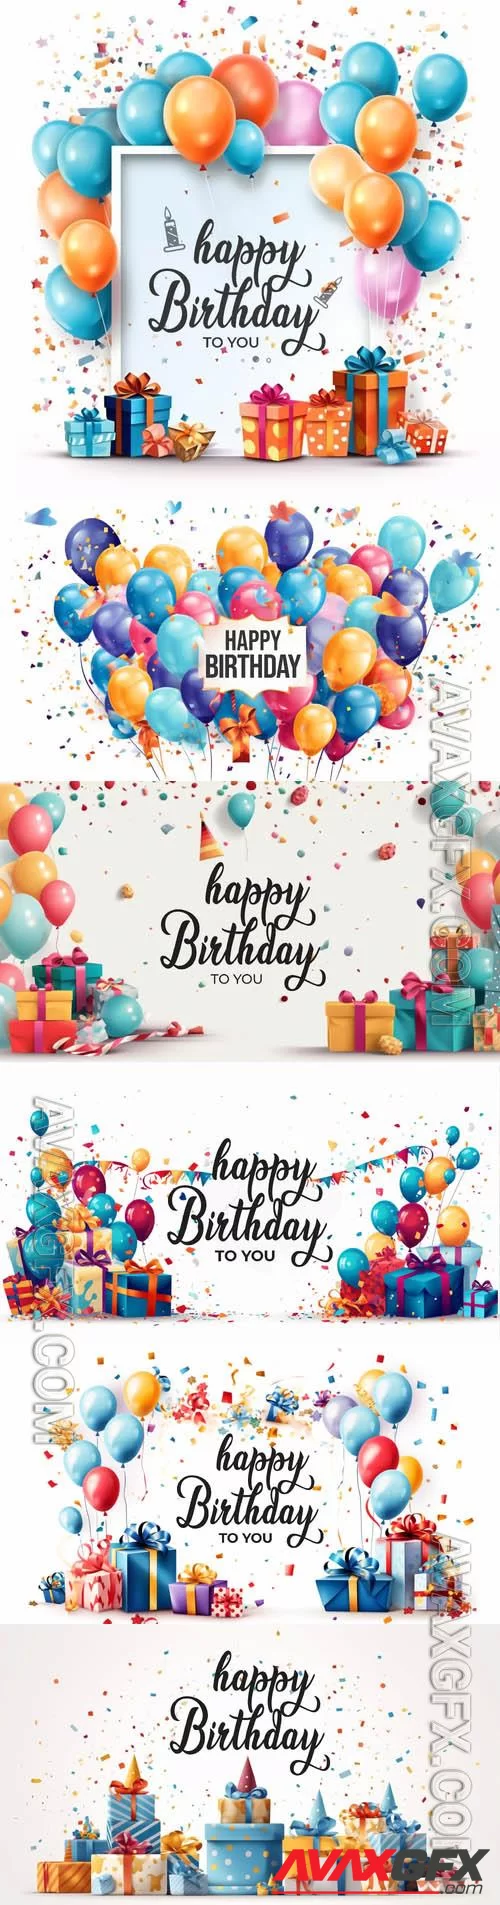 Happy birthday psd backgrounds with balloons and gift boxes